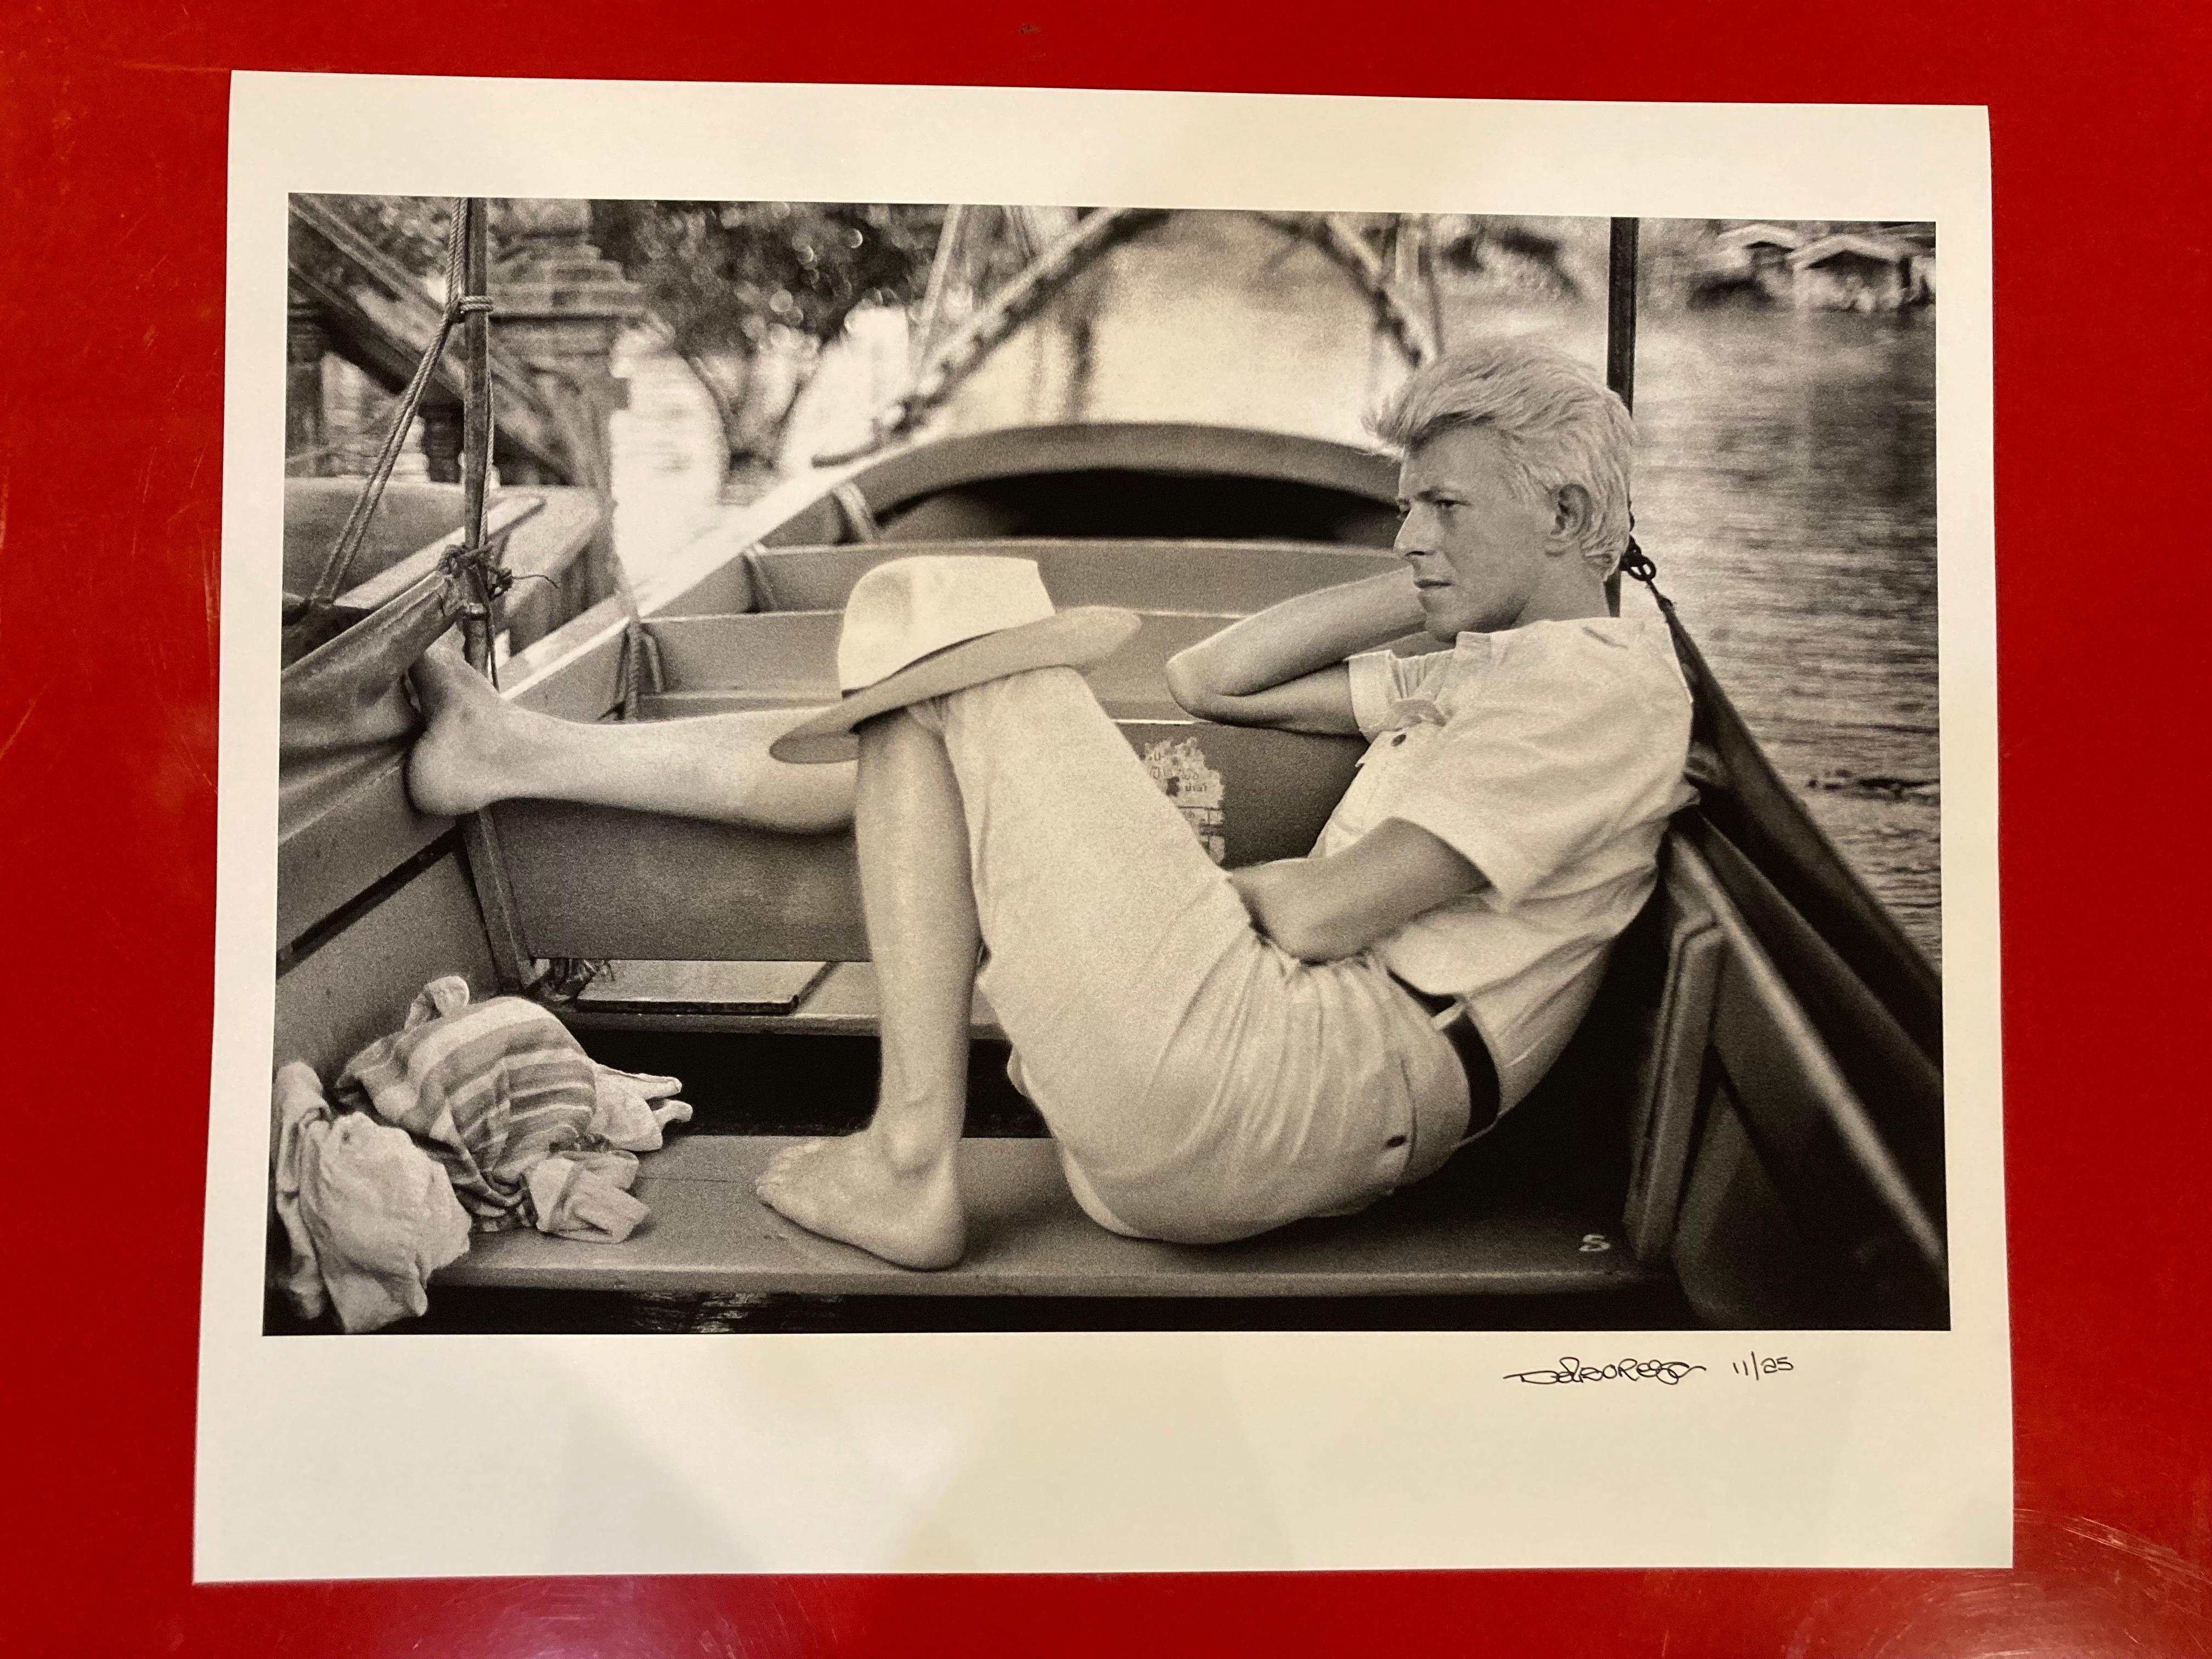 20x24” signed limited edition print of David Bowie taken by Dennis O’Regan

Taken on a boat on the Chao Phraya River, Bangkok in 1983

Signed limited edition number 11/25